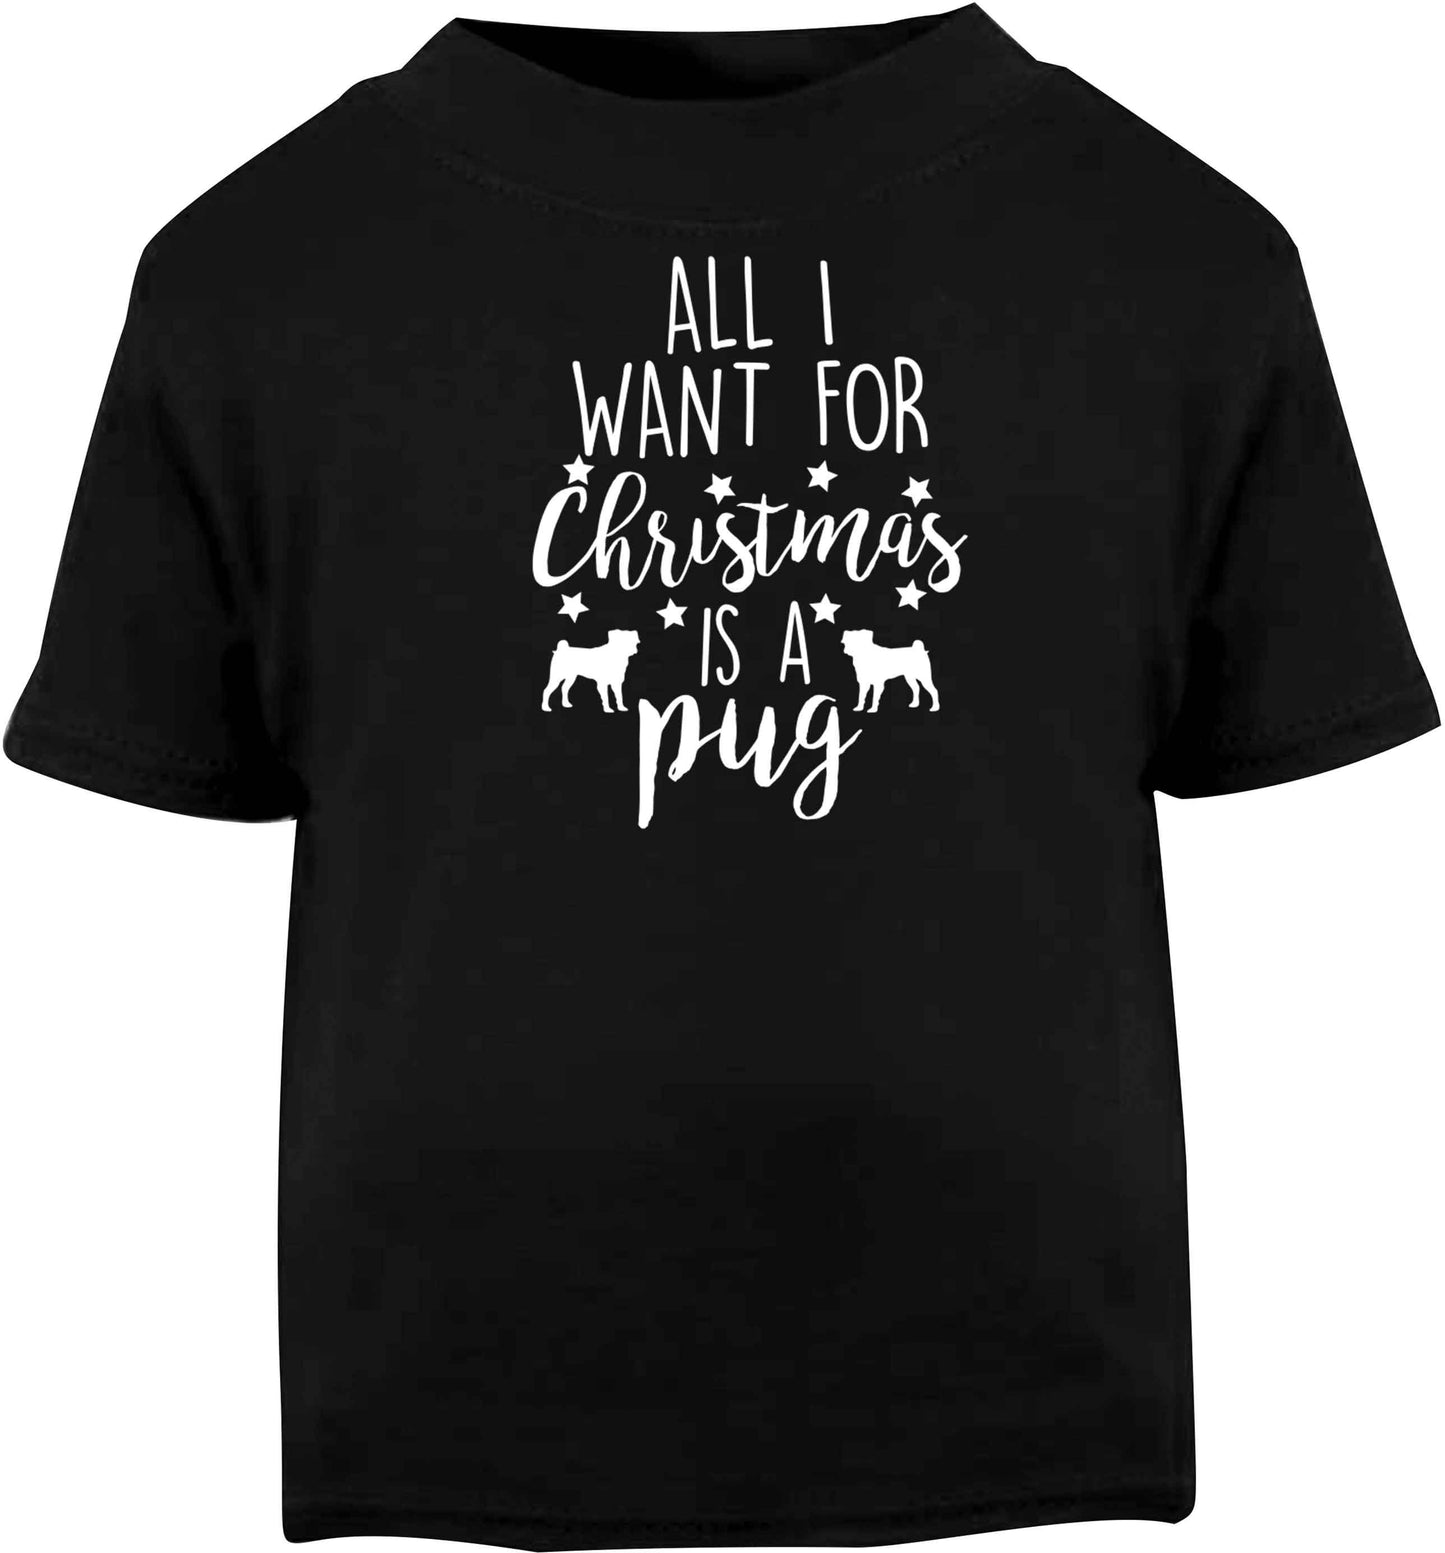 All I want for Christmas is a pug Black baby toddler Tshirt 2 years